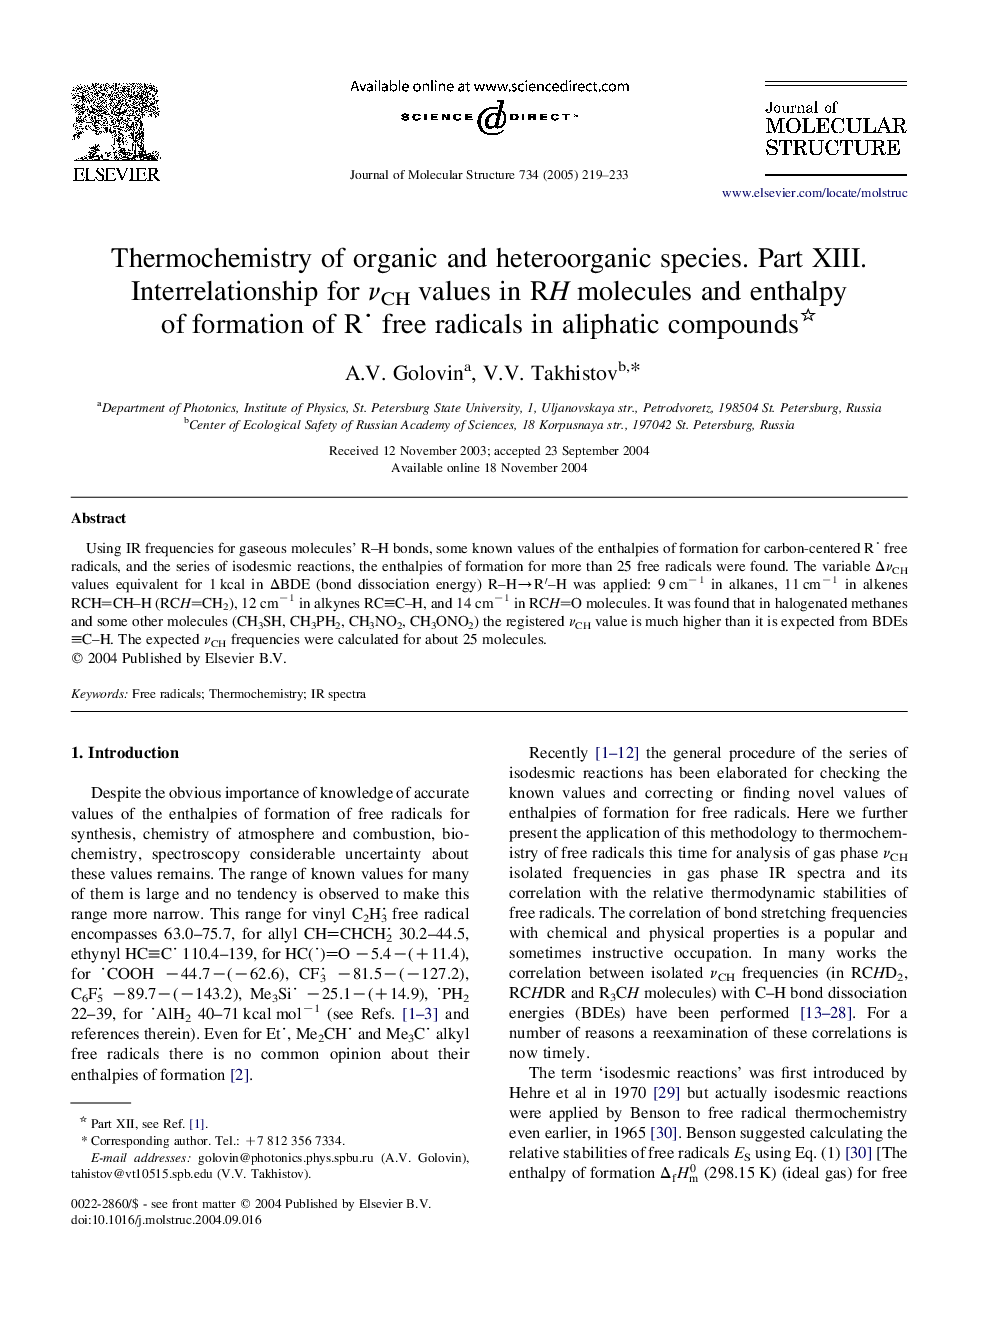 Thermochemistry of organic and heteroorganic species. Part XIII. Interrelationship for Î½CH values in RH molecules and enthalpy of formation of R free radicals in aliphatic compounds